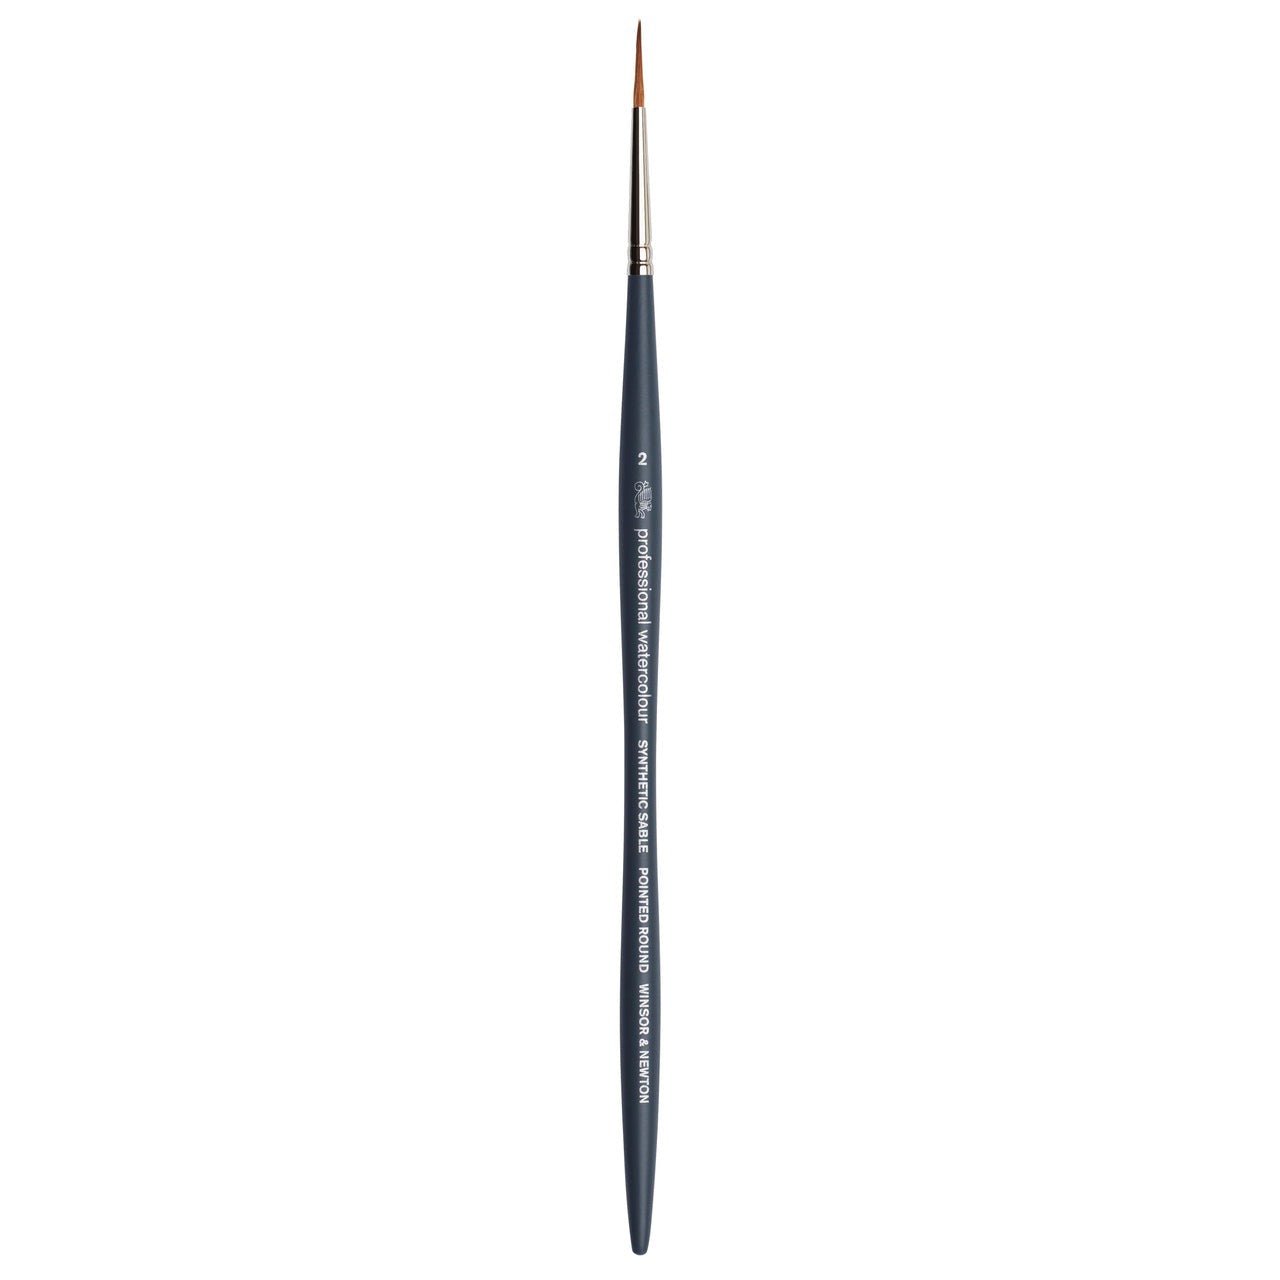 Winsor & Newton Professional Watercolor Synthetic Sable Brush - Pointed Round 2 - merriartist.com